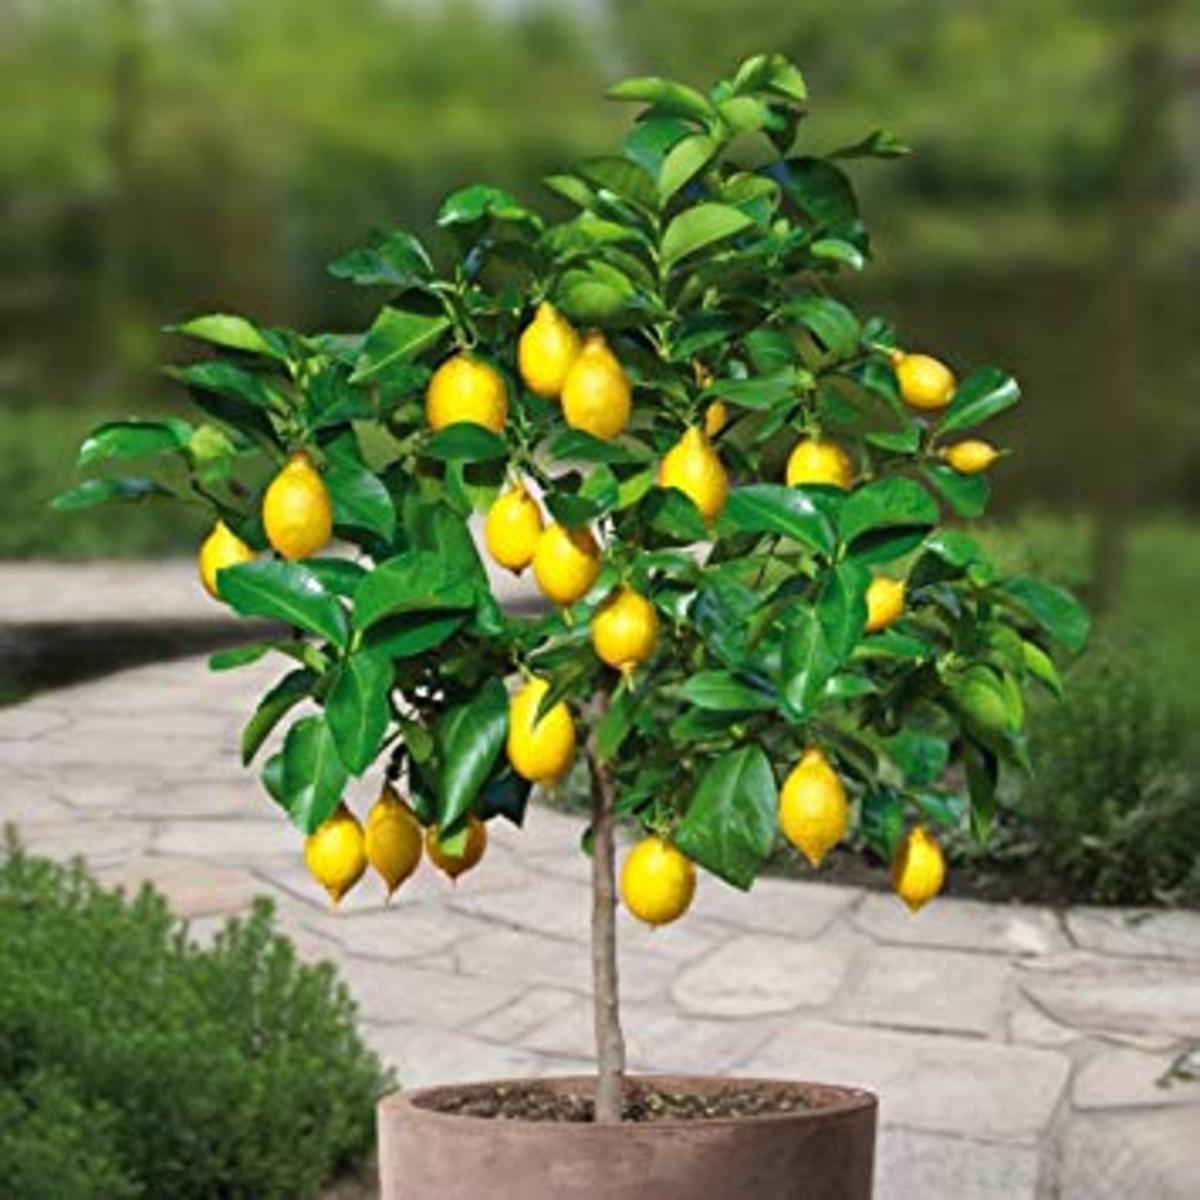 Citrus × meyeri, the Meyer lemon, is a hybrid citrus fruit native to China. It is a cross between a citron and a mandarin/pomelo hybrid distinct from the common or bitter oranges. Mature trees are around 6 to 10 ft tall with dark green shiny leaves.